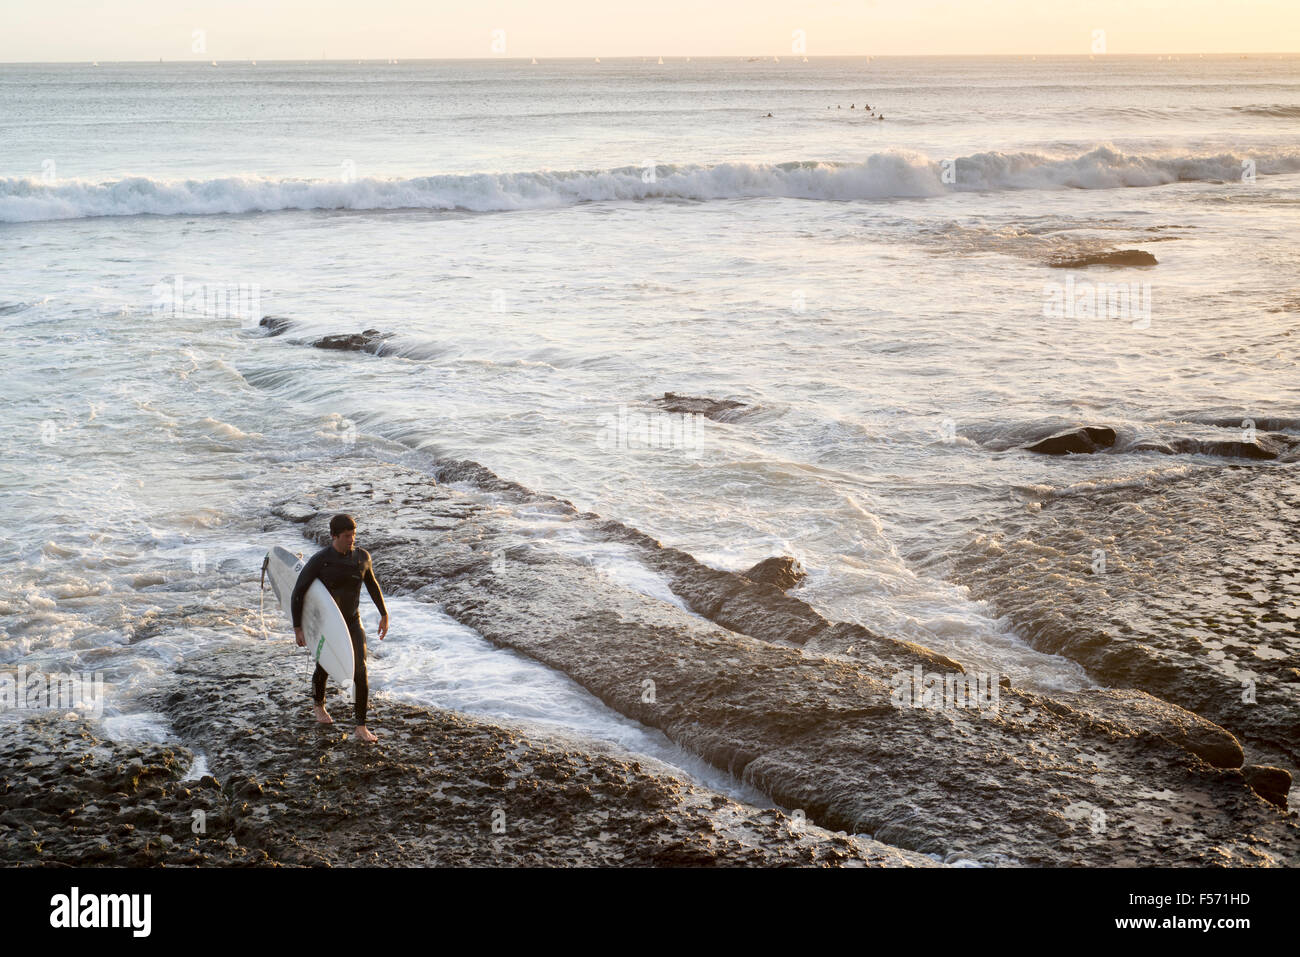 Male surfer walking over reef looking out to sea at surf with setting sun, Estoril, Cascais, Portugal Stock Photo